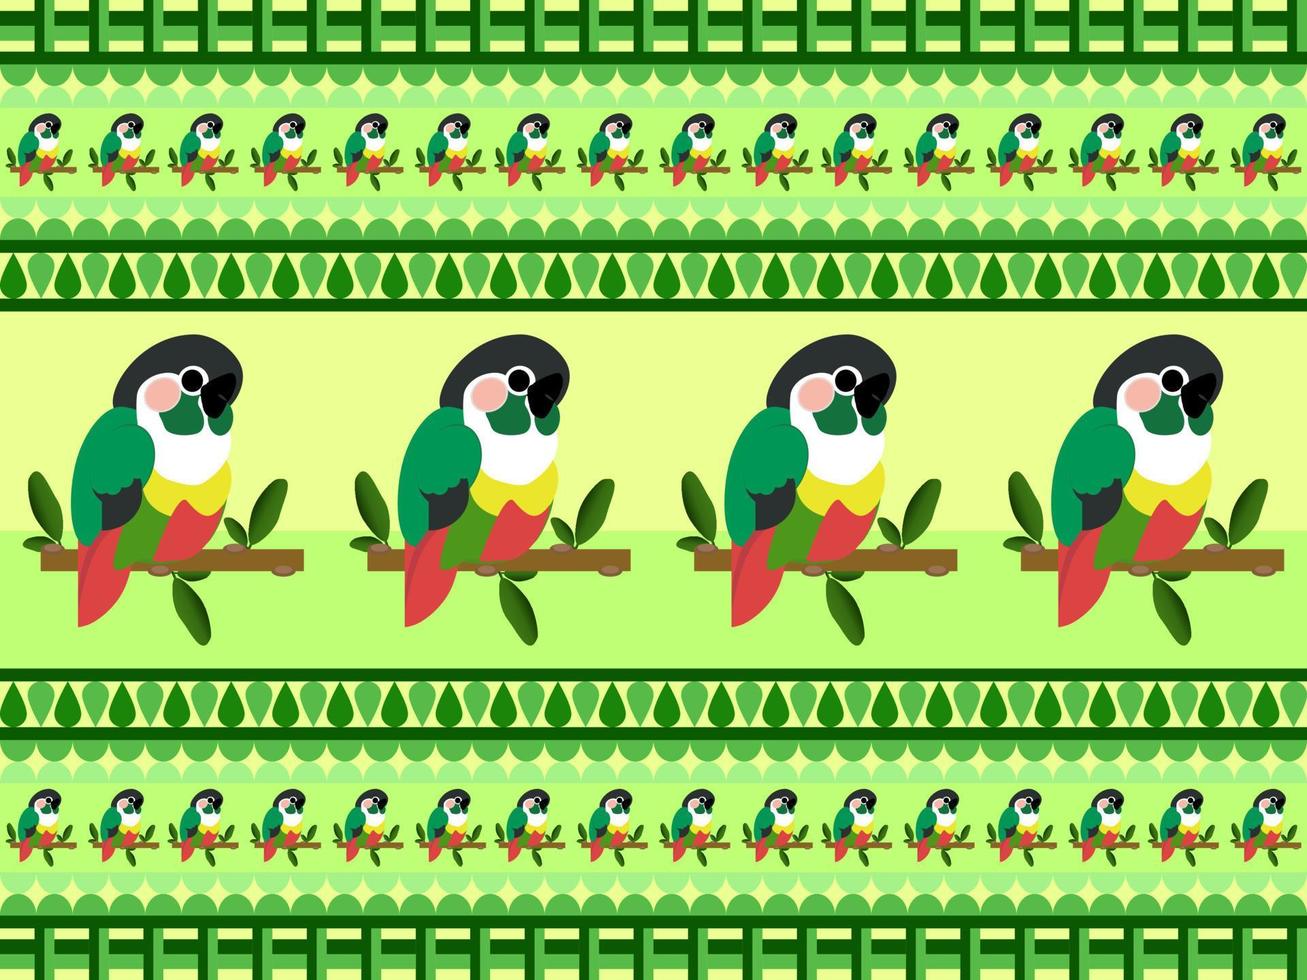 parrot cartoon character seamless pattern on green background vector